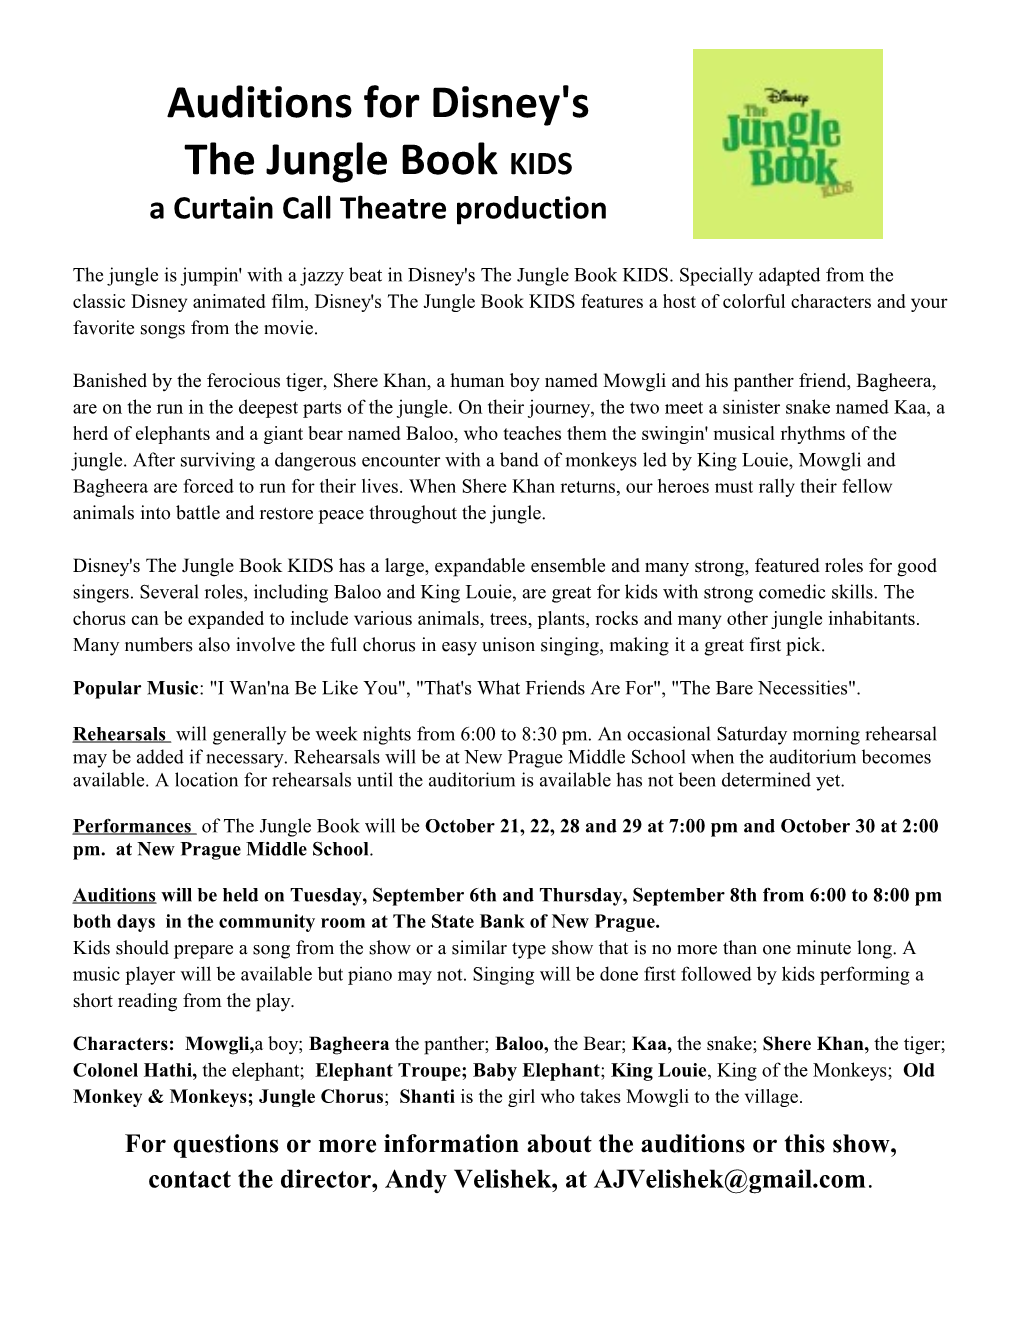 Auditions for Disney's the Jungle Book KIDS a Curtain Call Theatre Production